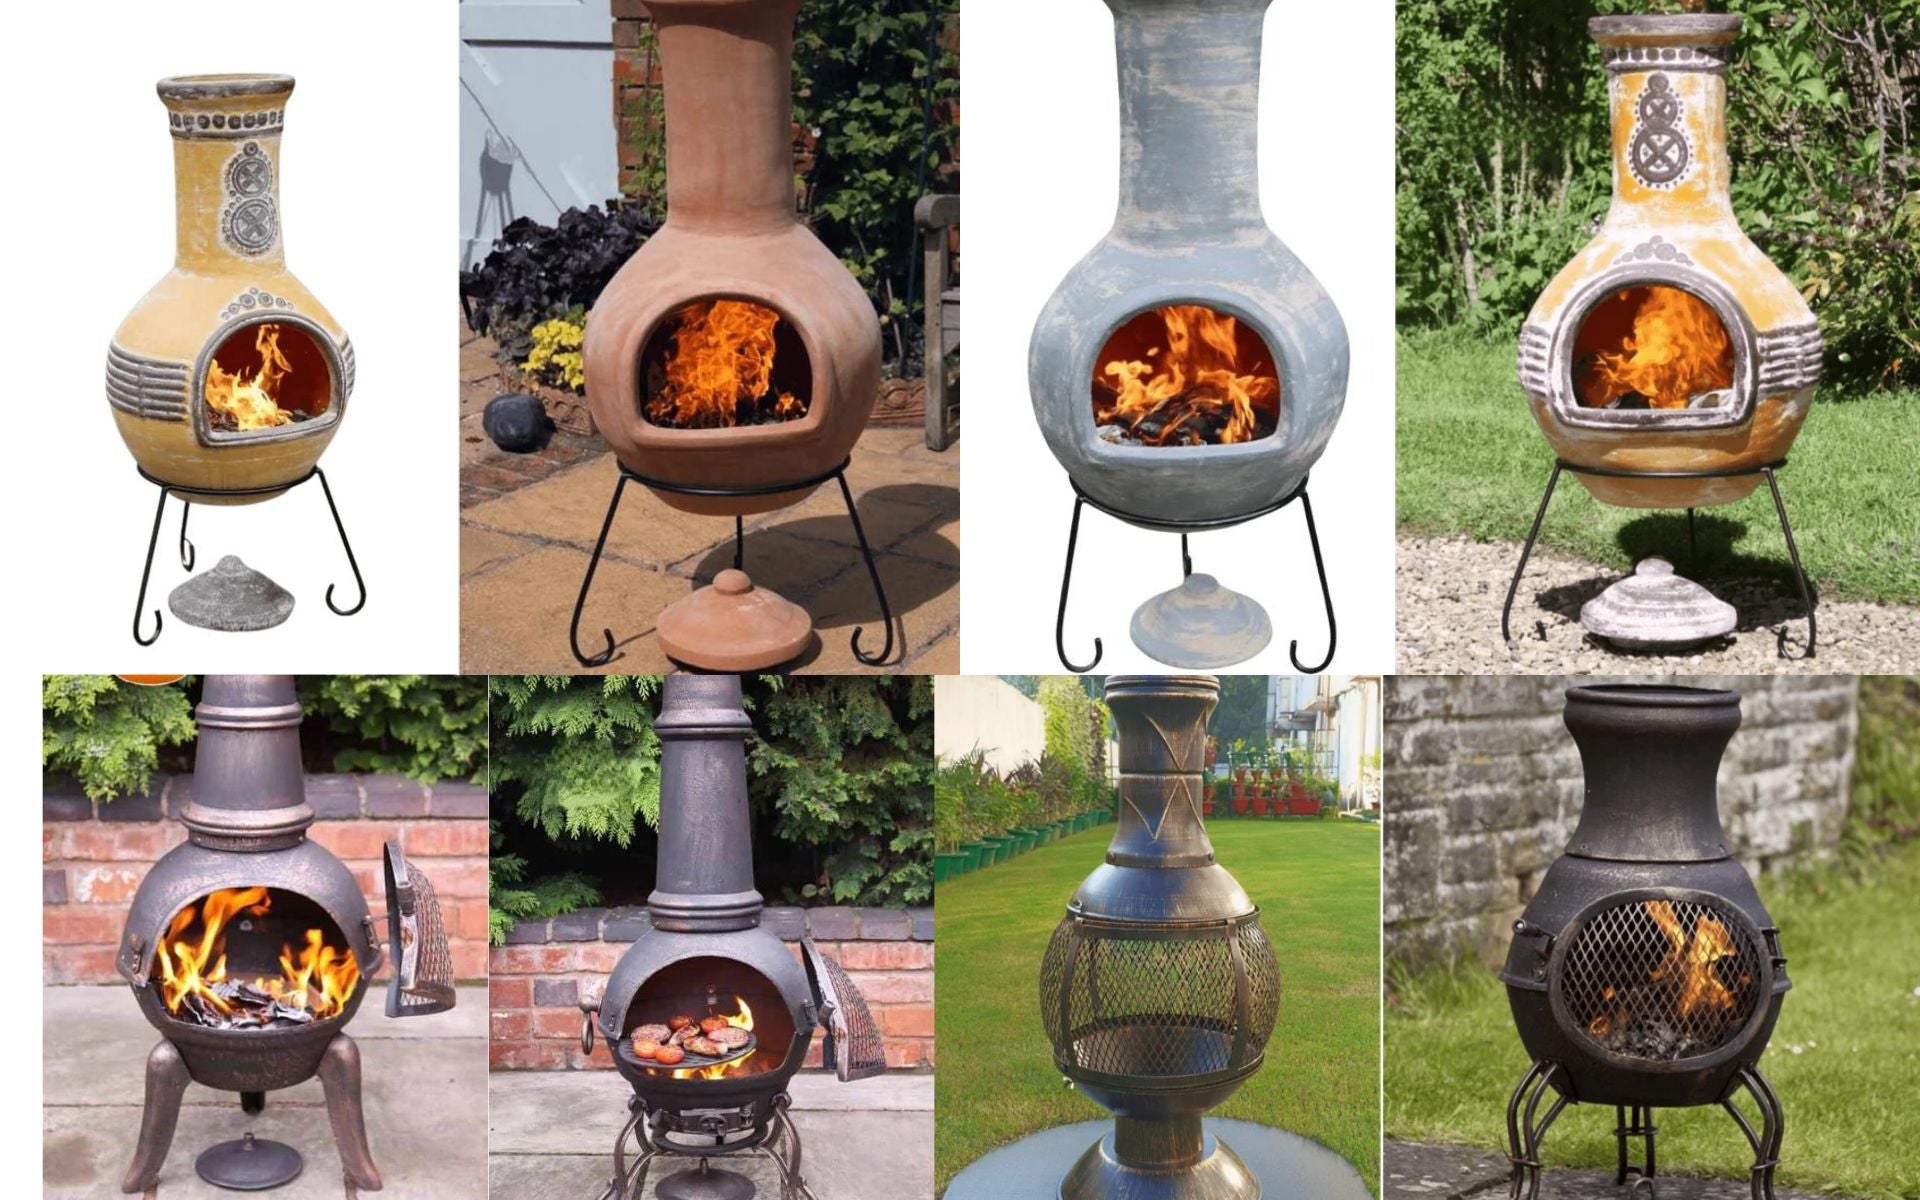 How to Choose the Perfect Clay Chiminea for Your Outdoor Space: Materials, Sizes, and Styles